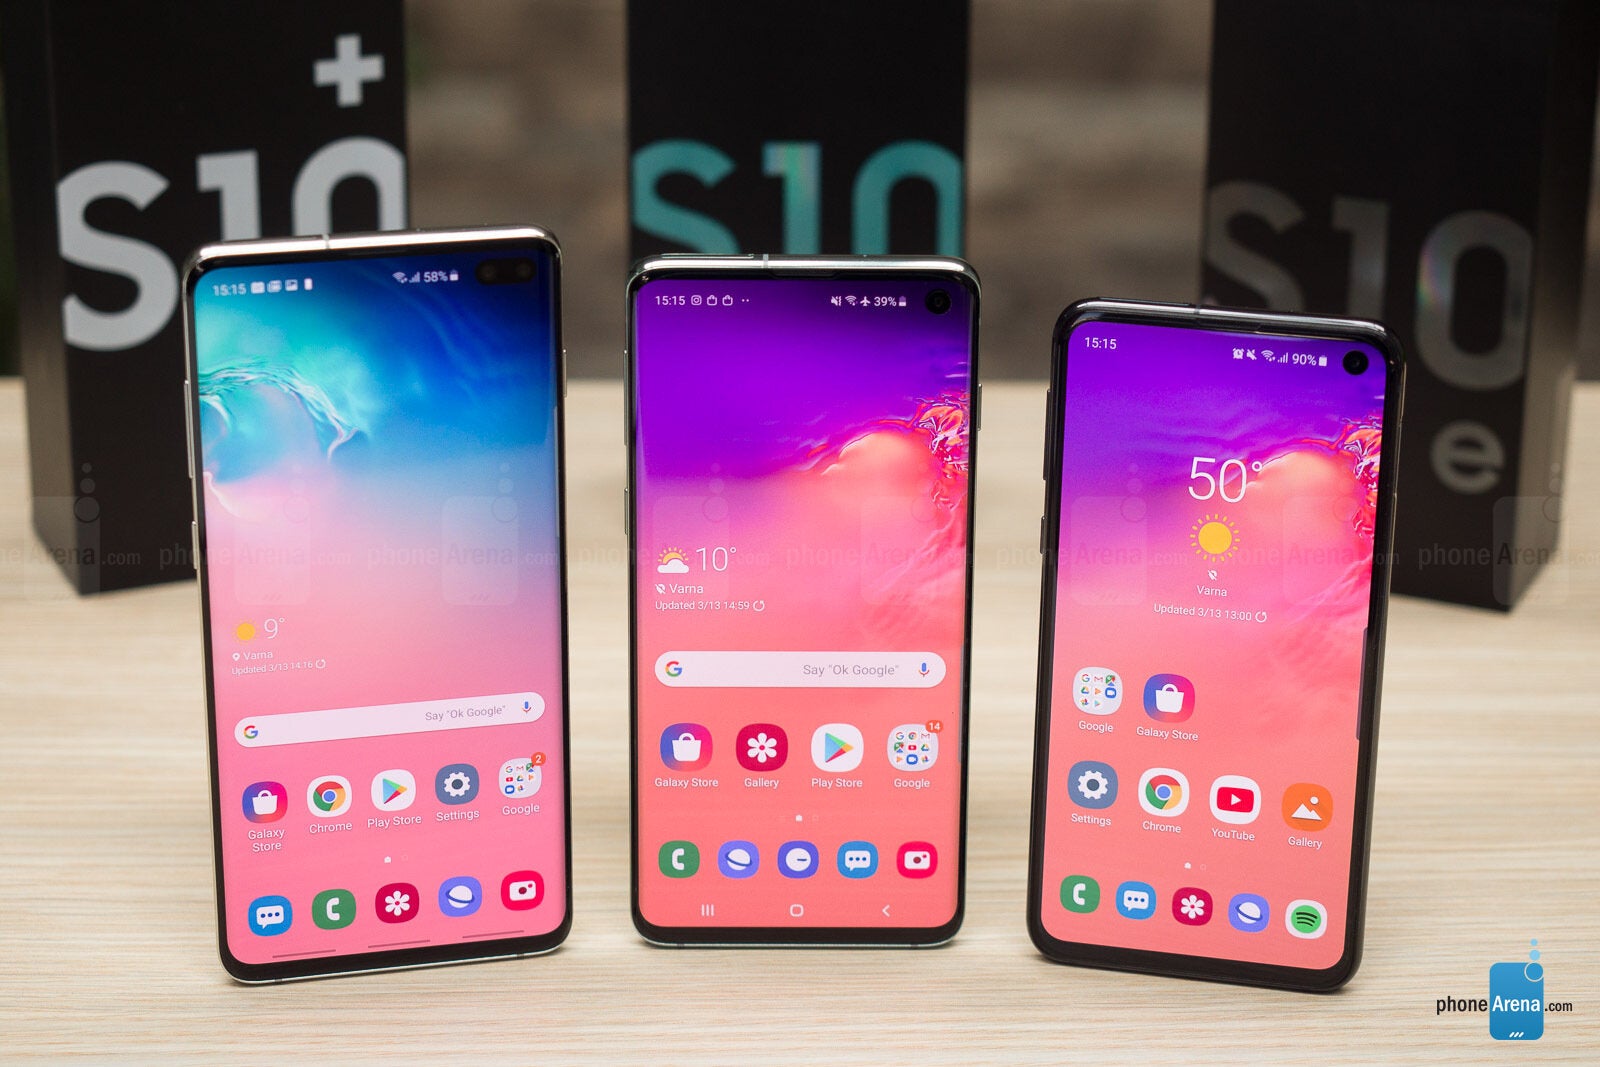 Galaxy S10+, Galaxy S10, and a cheap phone - Why would a Galaxy S10 Lite exist? What would its price be?